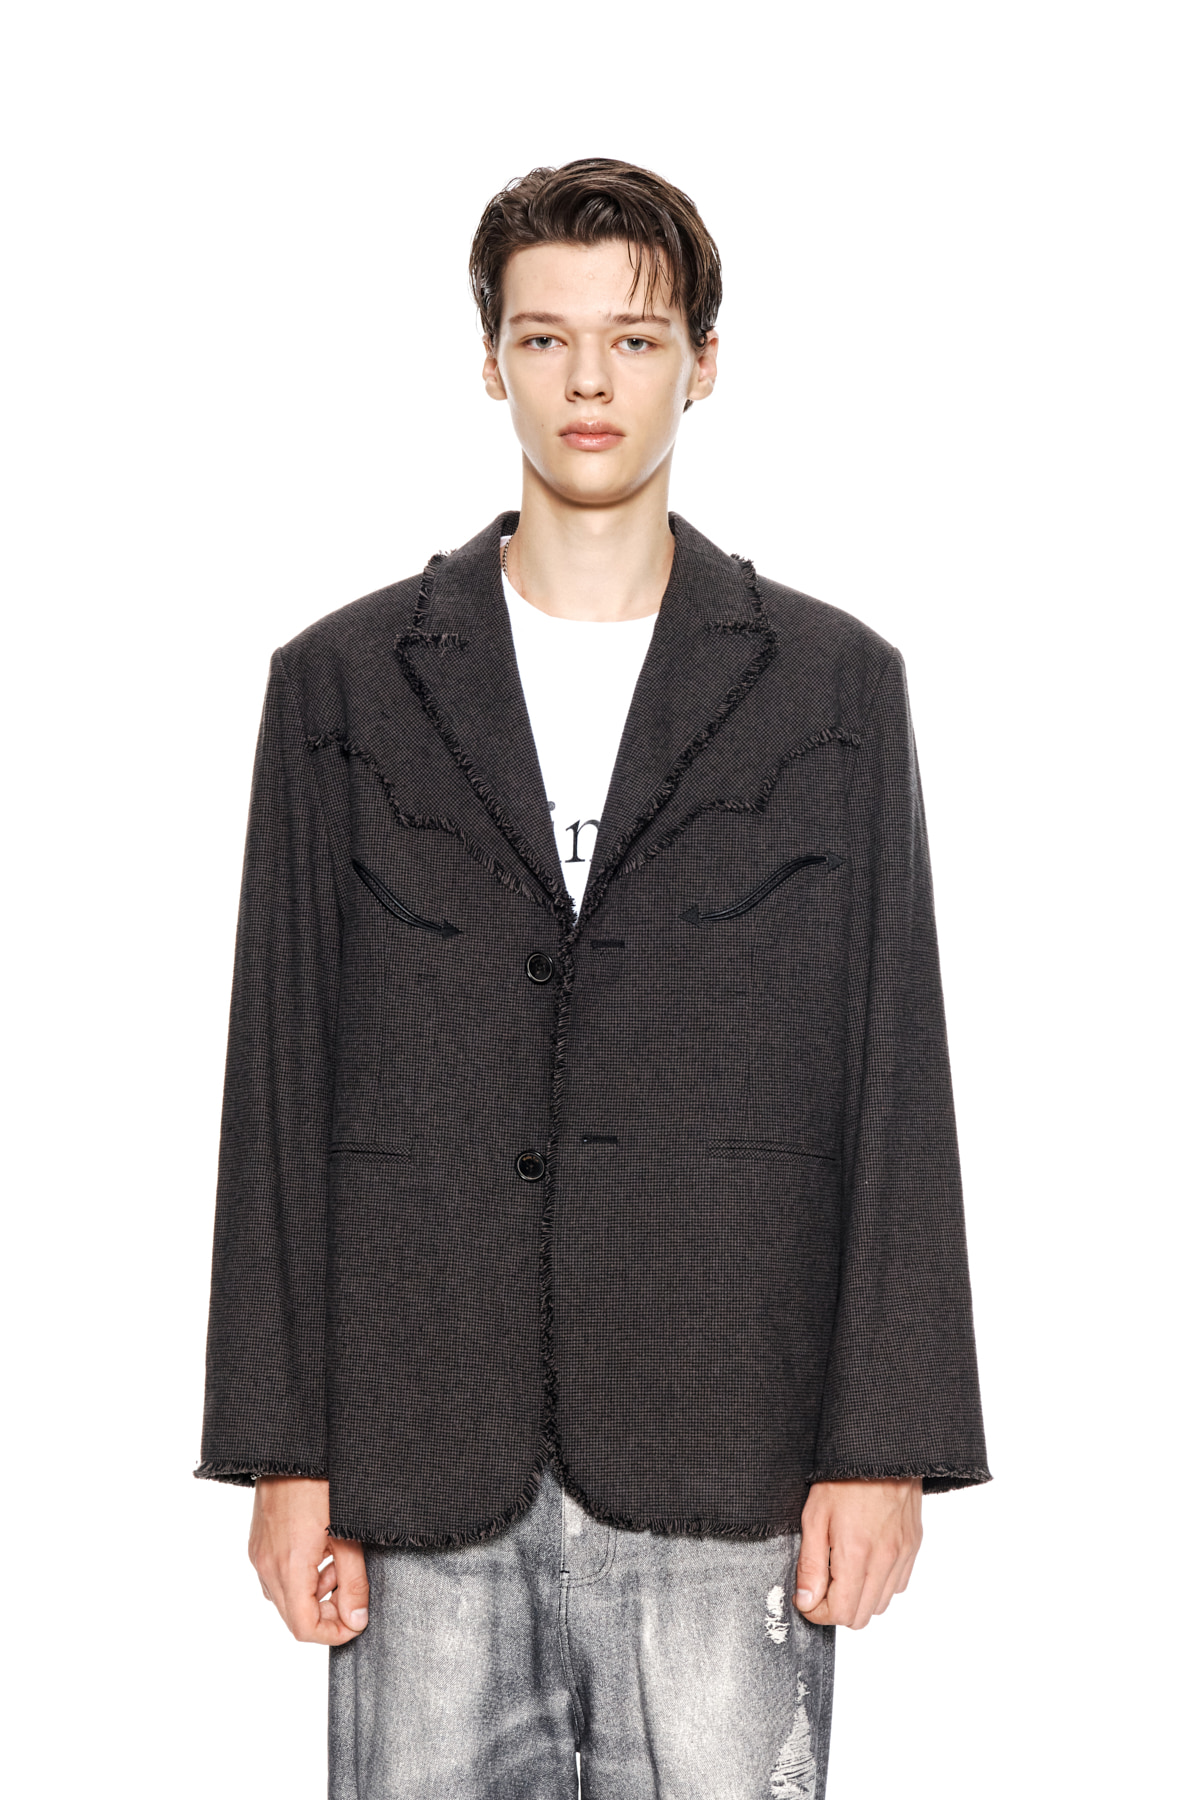 RAW CUT CHECK BLAZER FOR MEN IN CHARCOAL